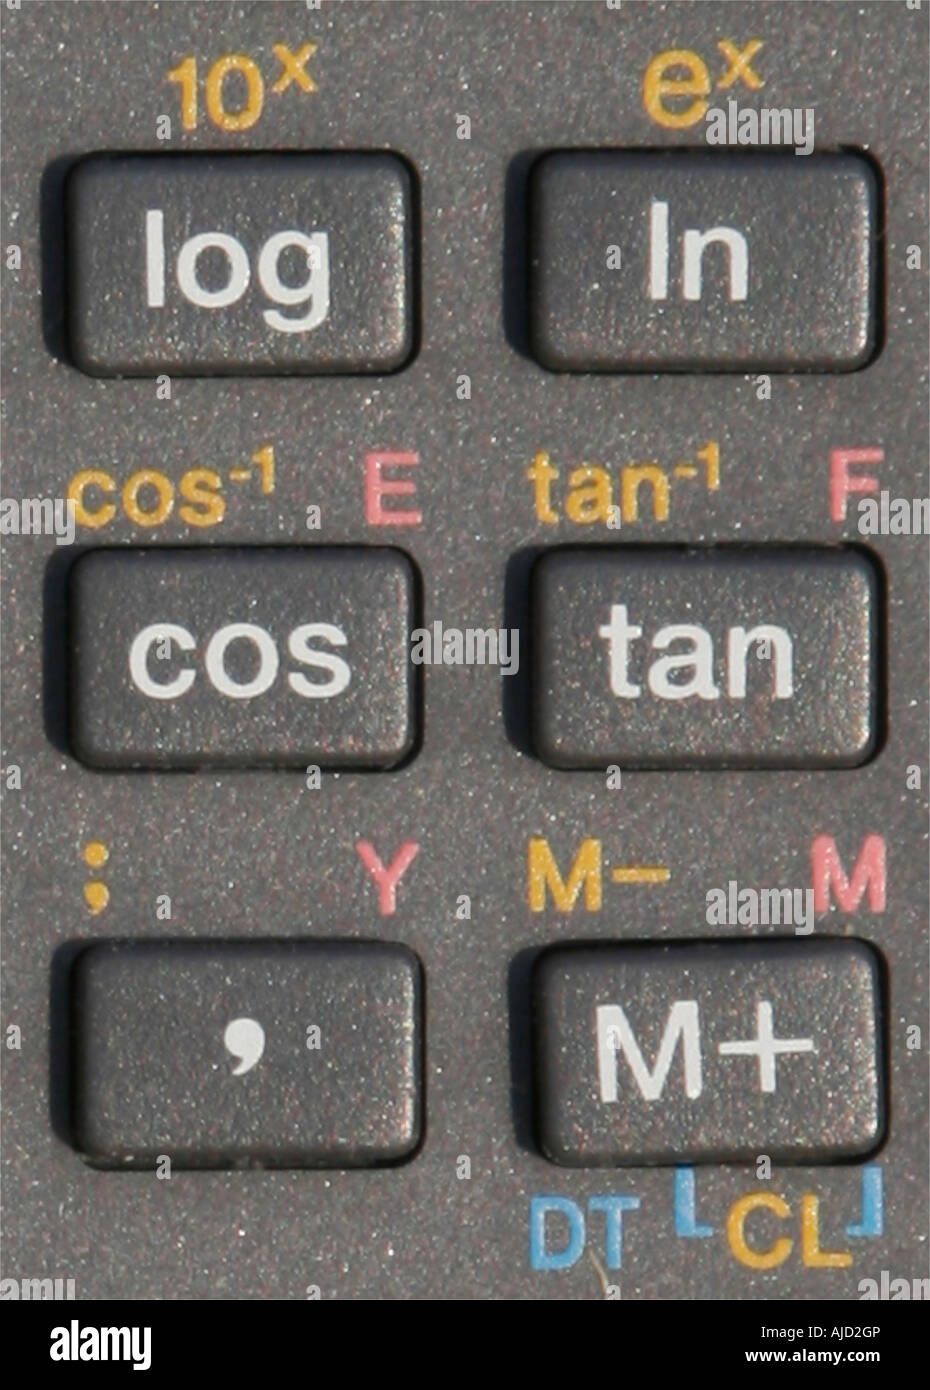 Grey Buttons on a calculator showing log in cos tan m+ , and mathematical  symbols Stock Photo - Alamy